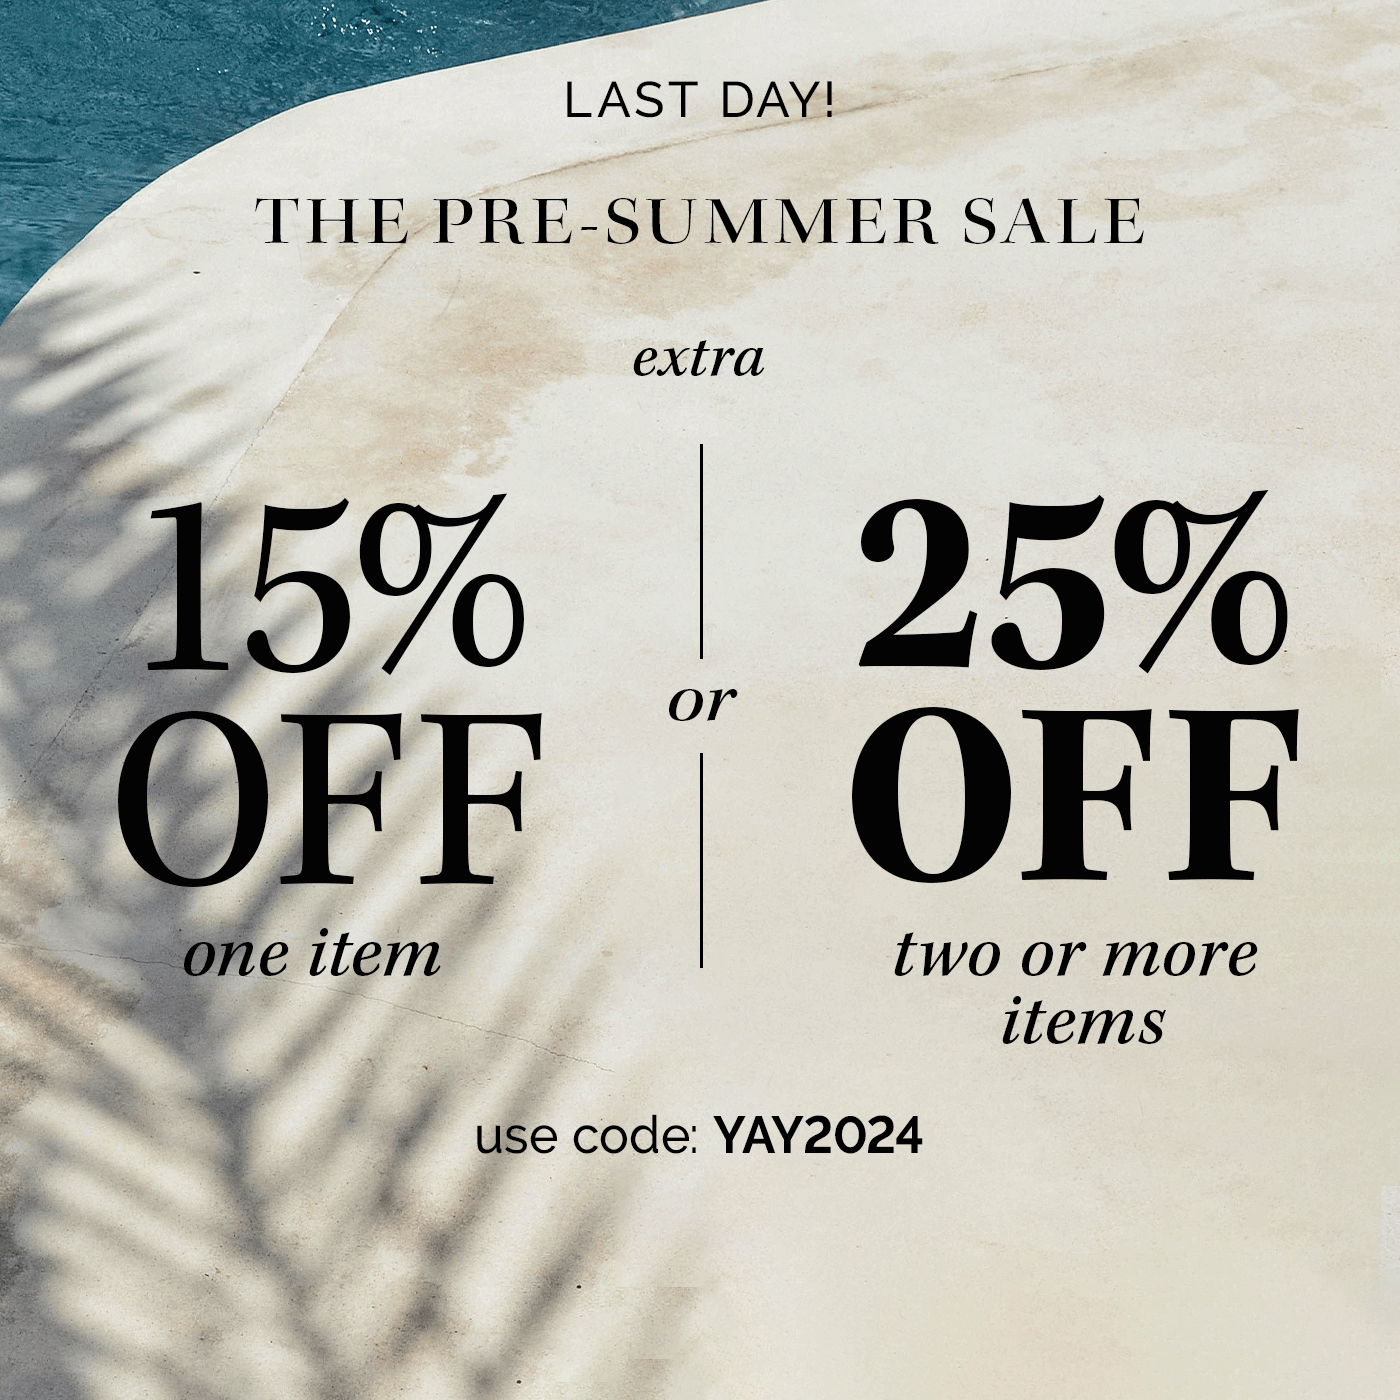 The Pre-Summer Sale Last Day Mobile Banner